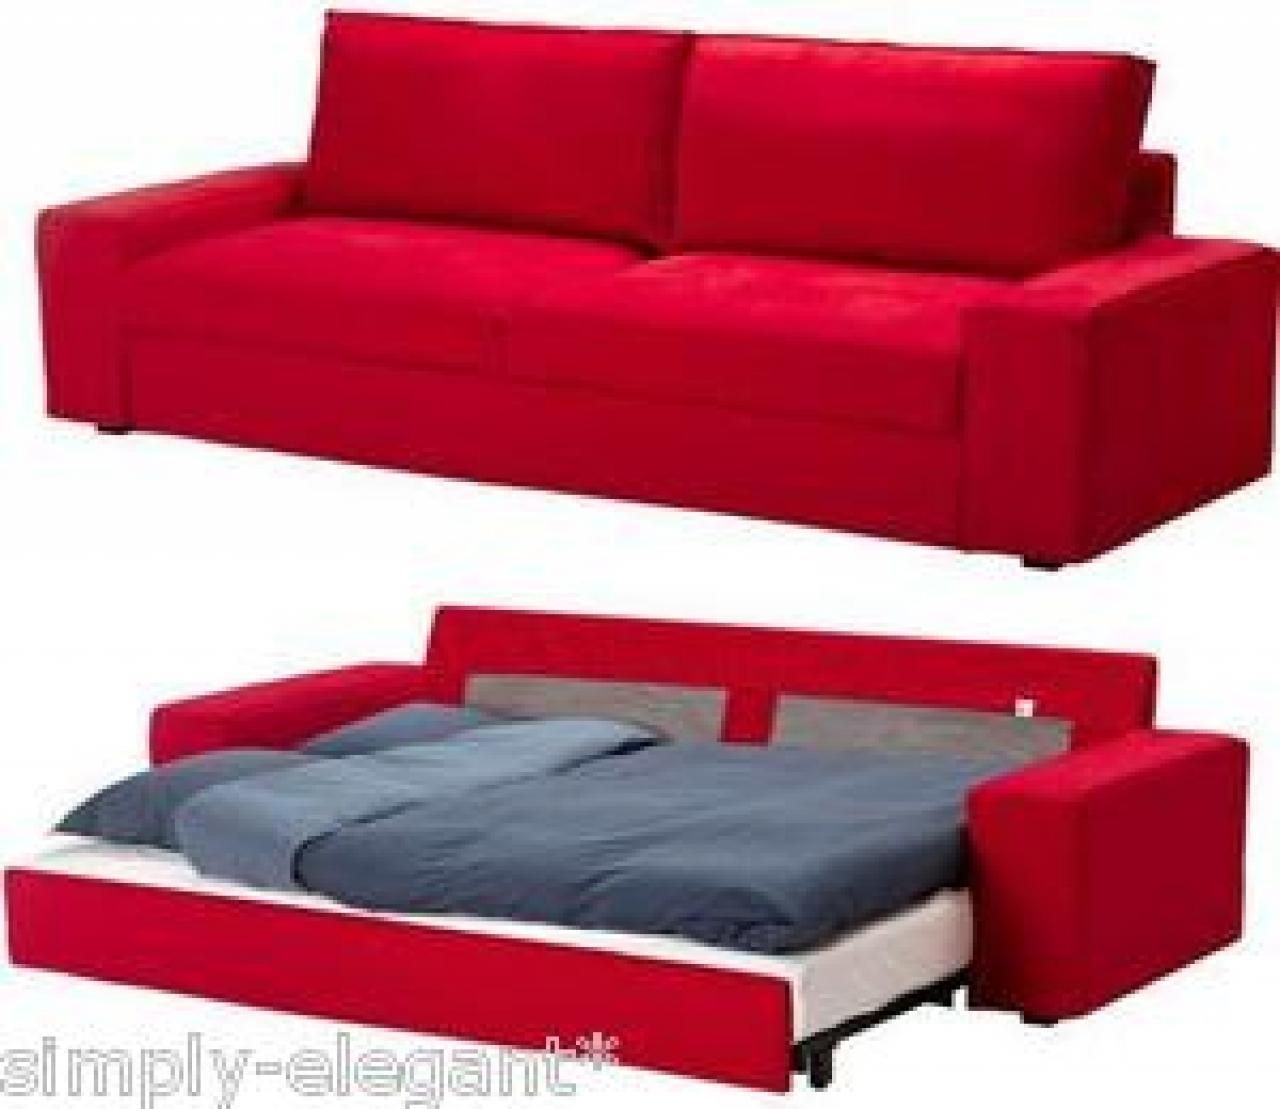 Furniture: Solsta Sofa Bed Review | Ikea Sleeper Sofa | Ikea Within Queen Size Convertible Sofa Beds (View 10 of 20)